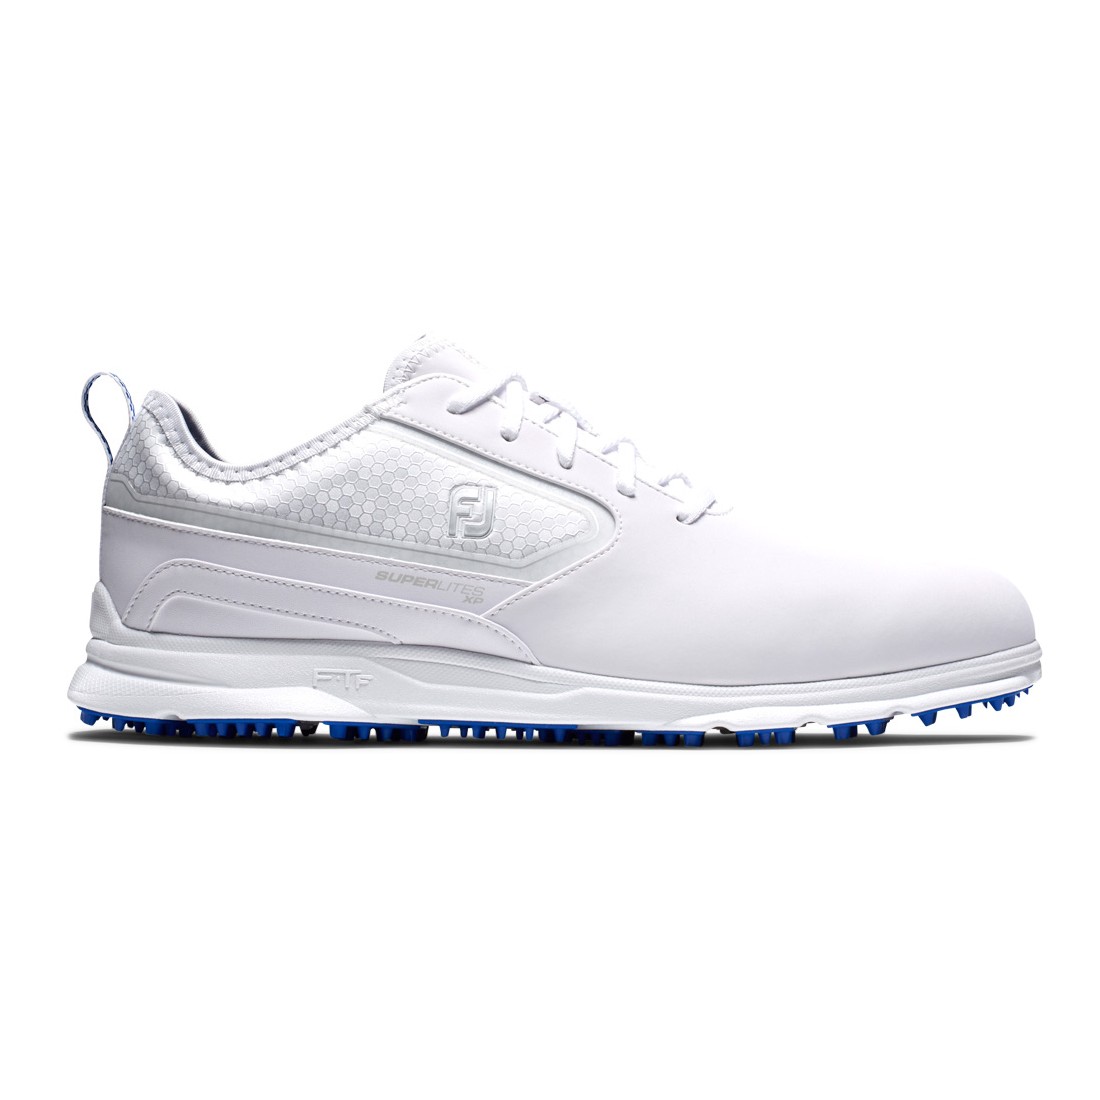 Footjoy chaussures Superlites XP blanches